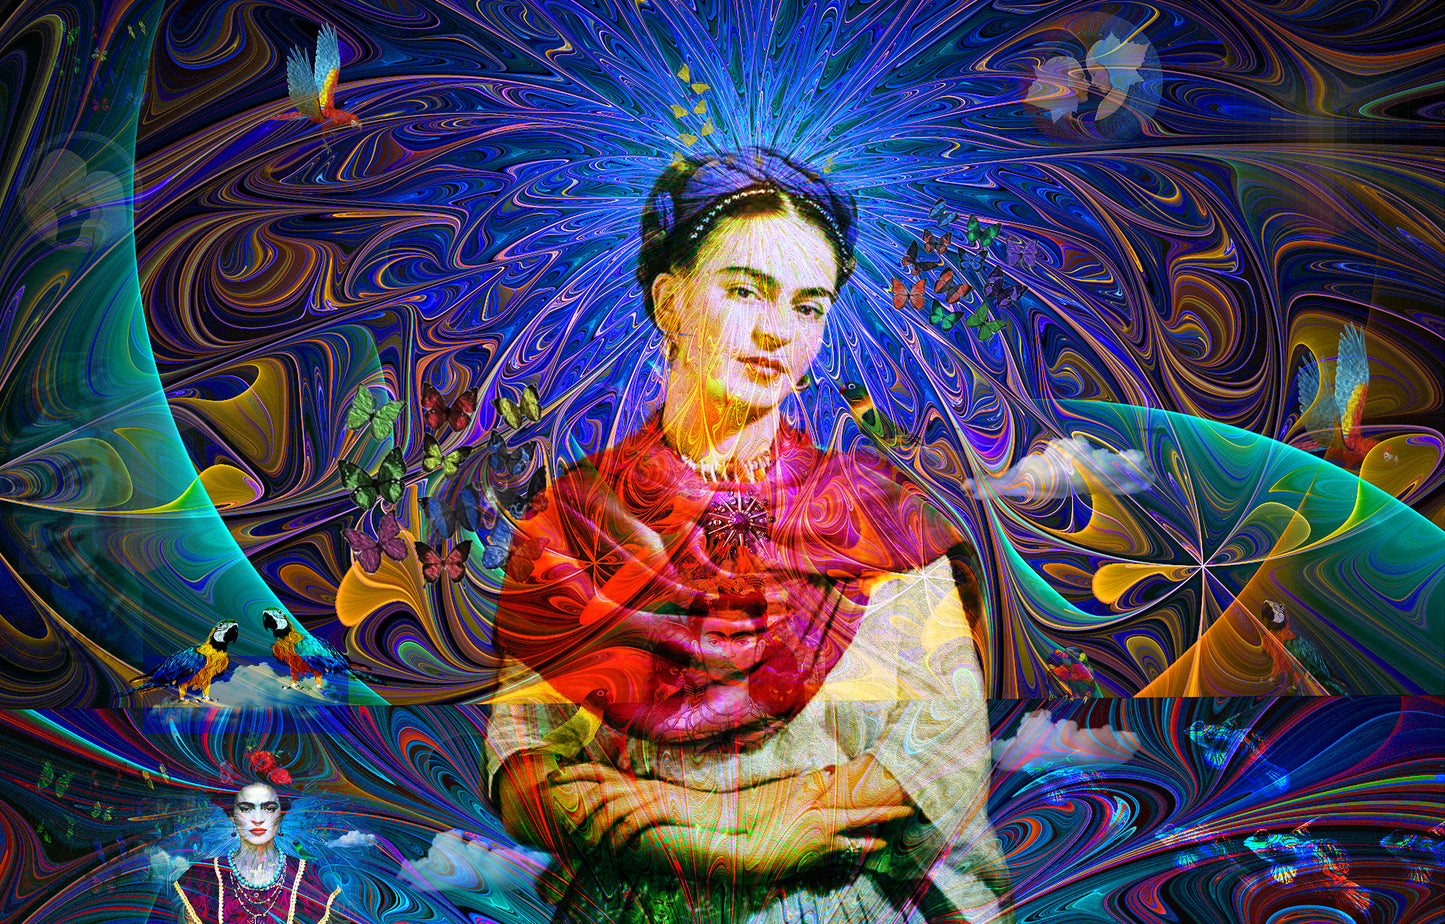 " FRIDA IN BLUE"  MIX MEDIA ARTWORK ON CANVAS 36 x 24 Inches